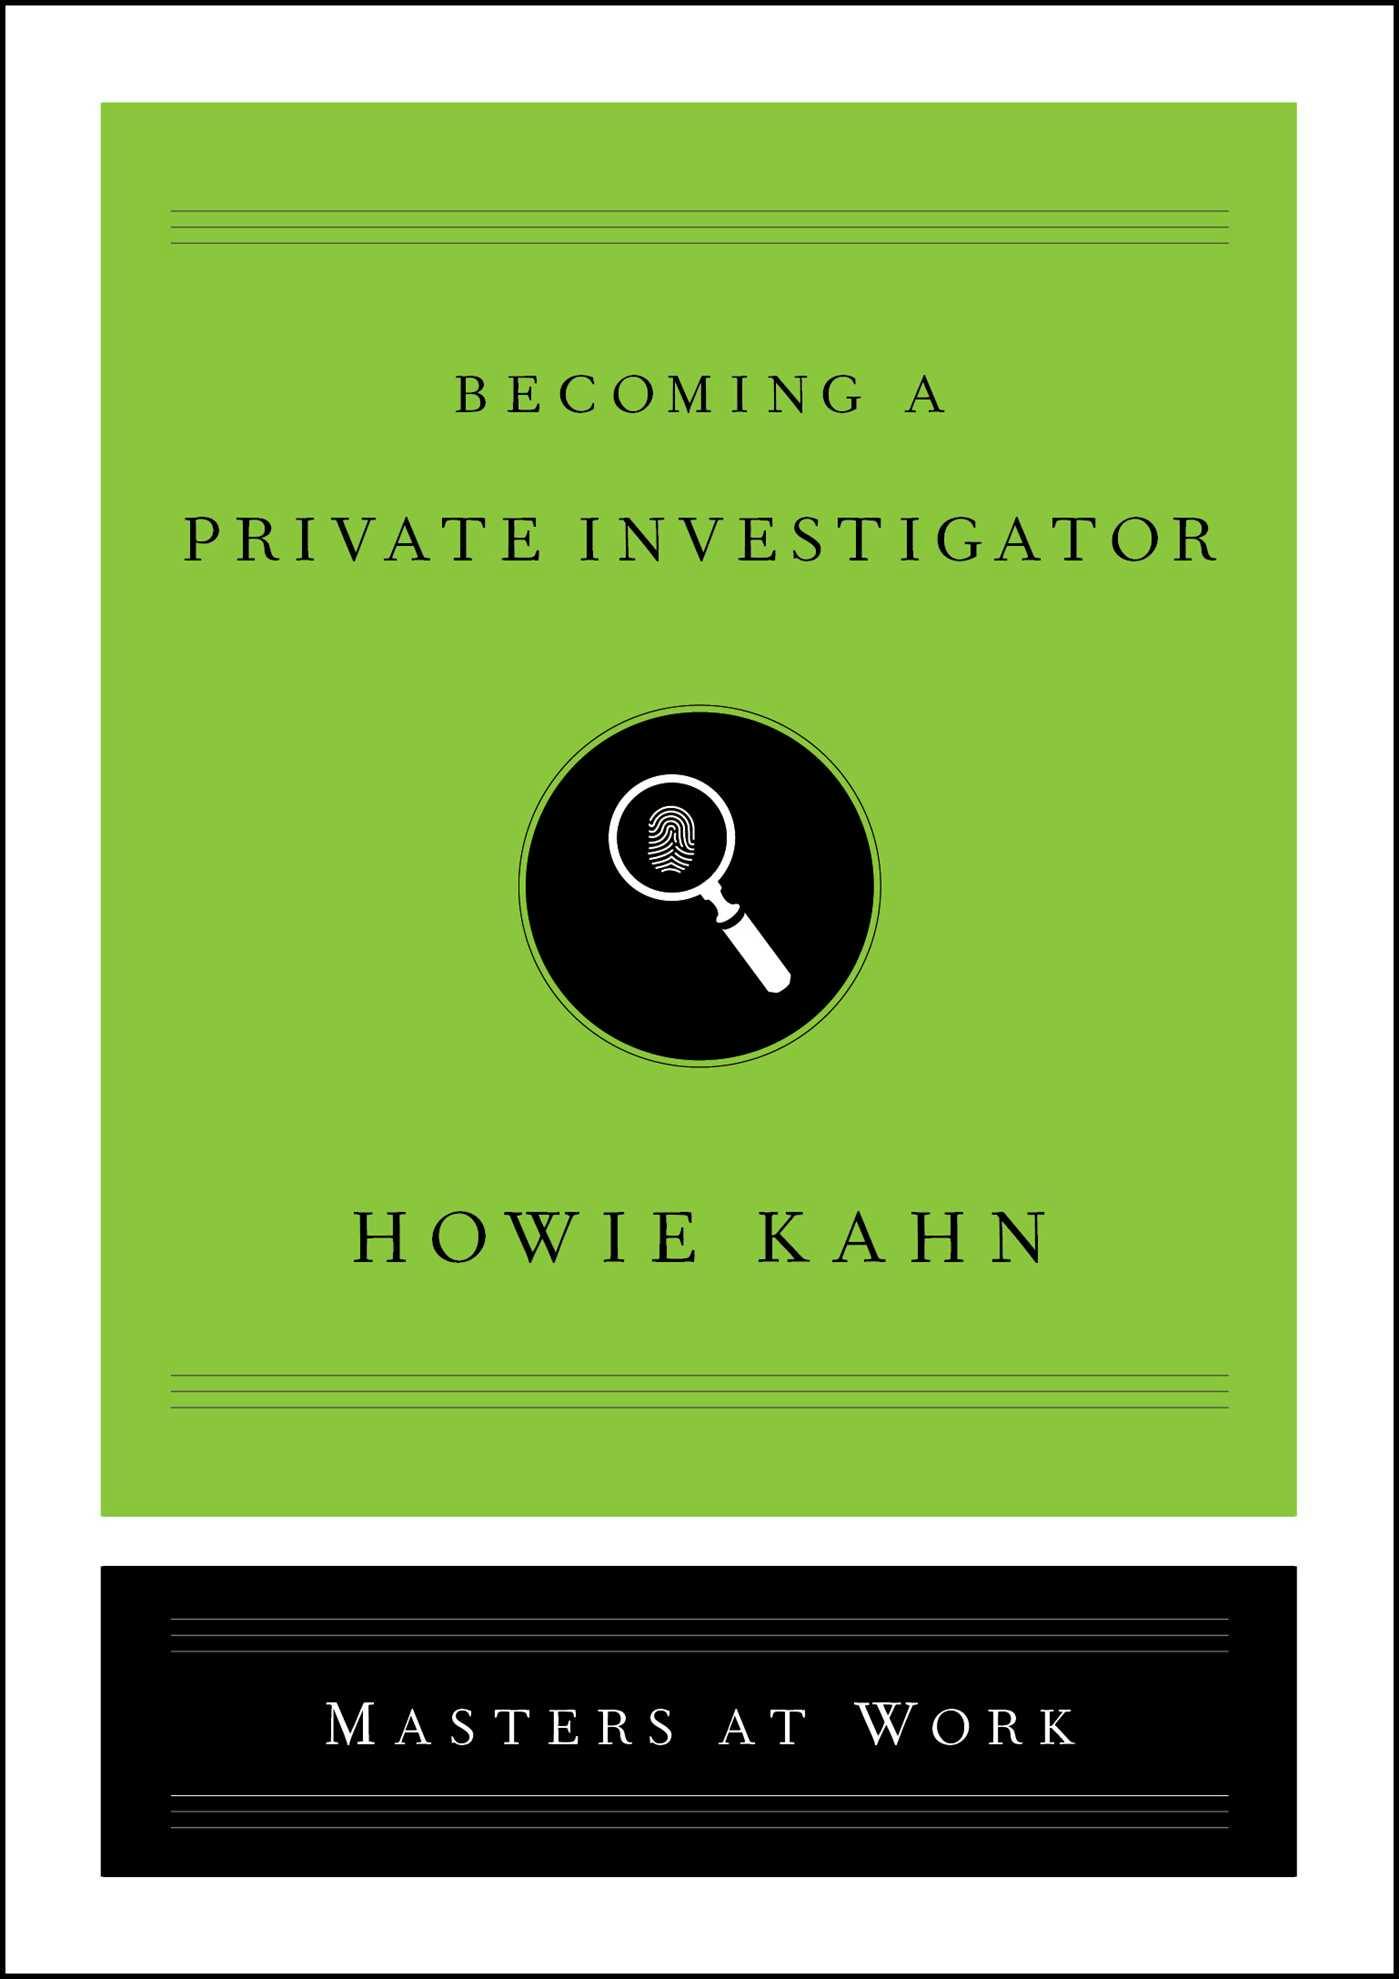 Becoming a Private Investigator - Howie Kahn